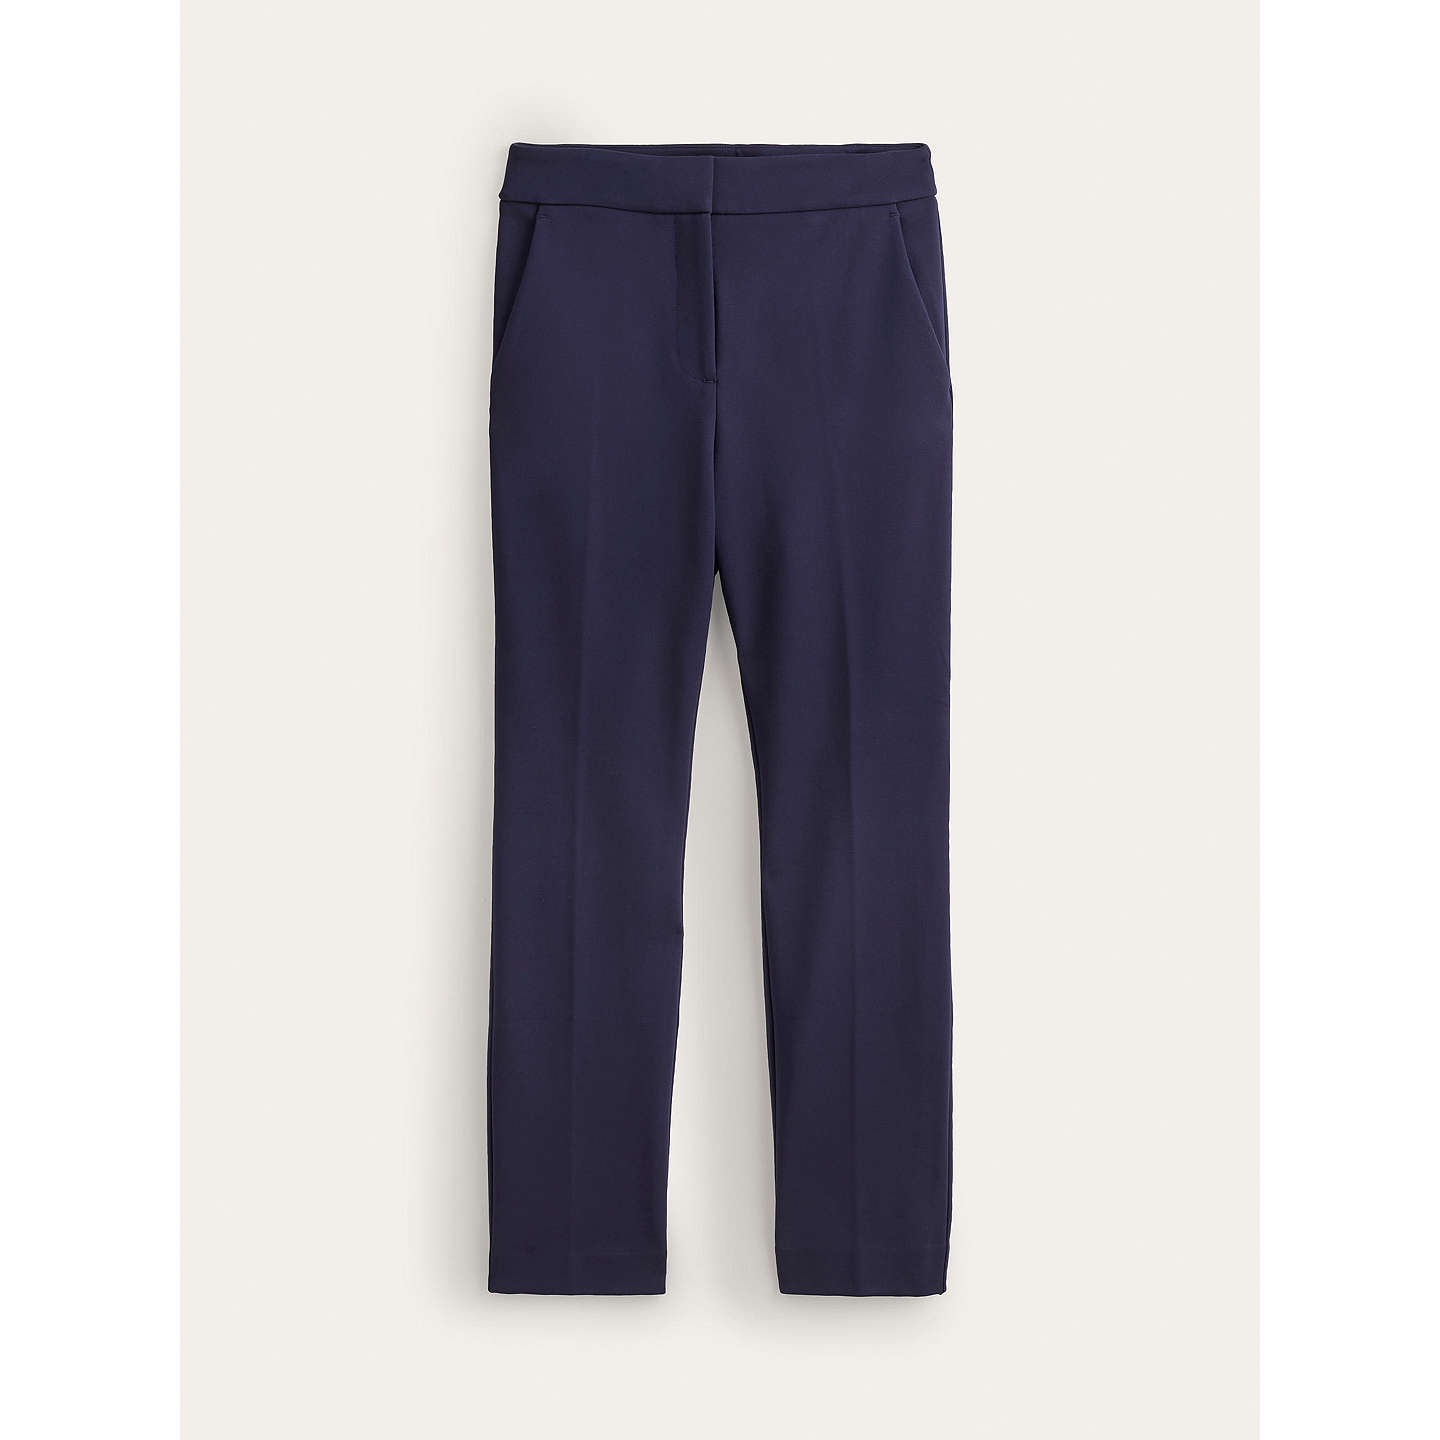 Boden Hampshire 7/8 Trousers | Navy at John Lewis